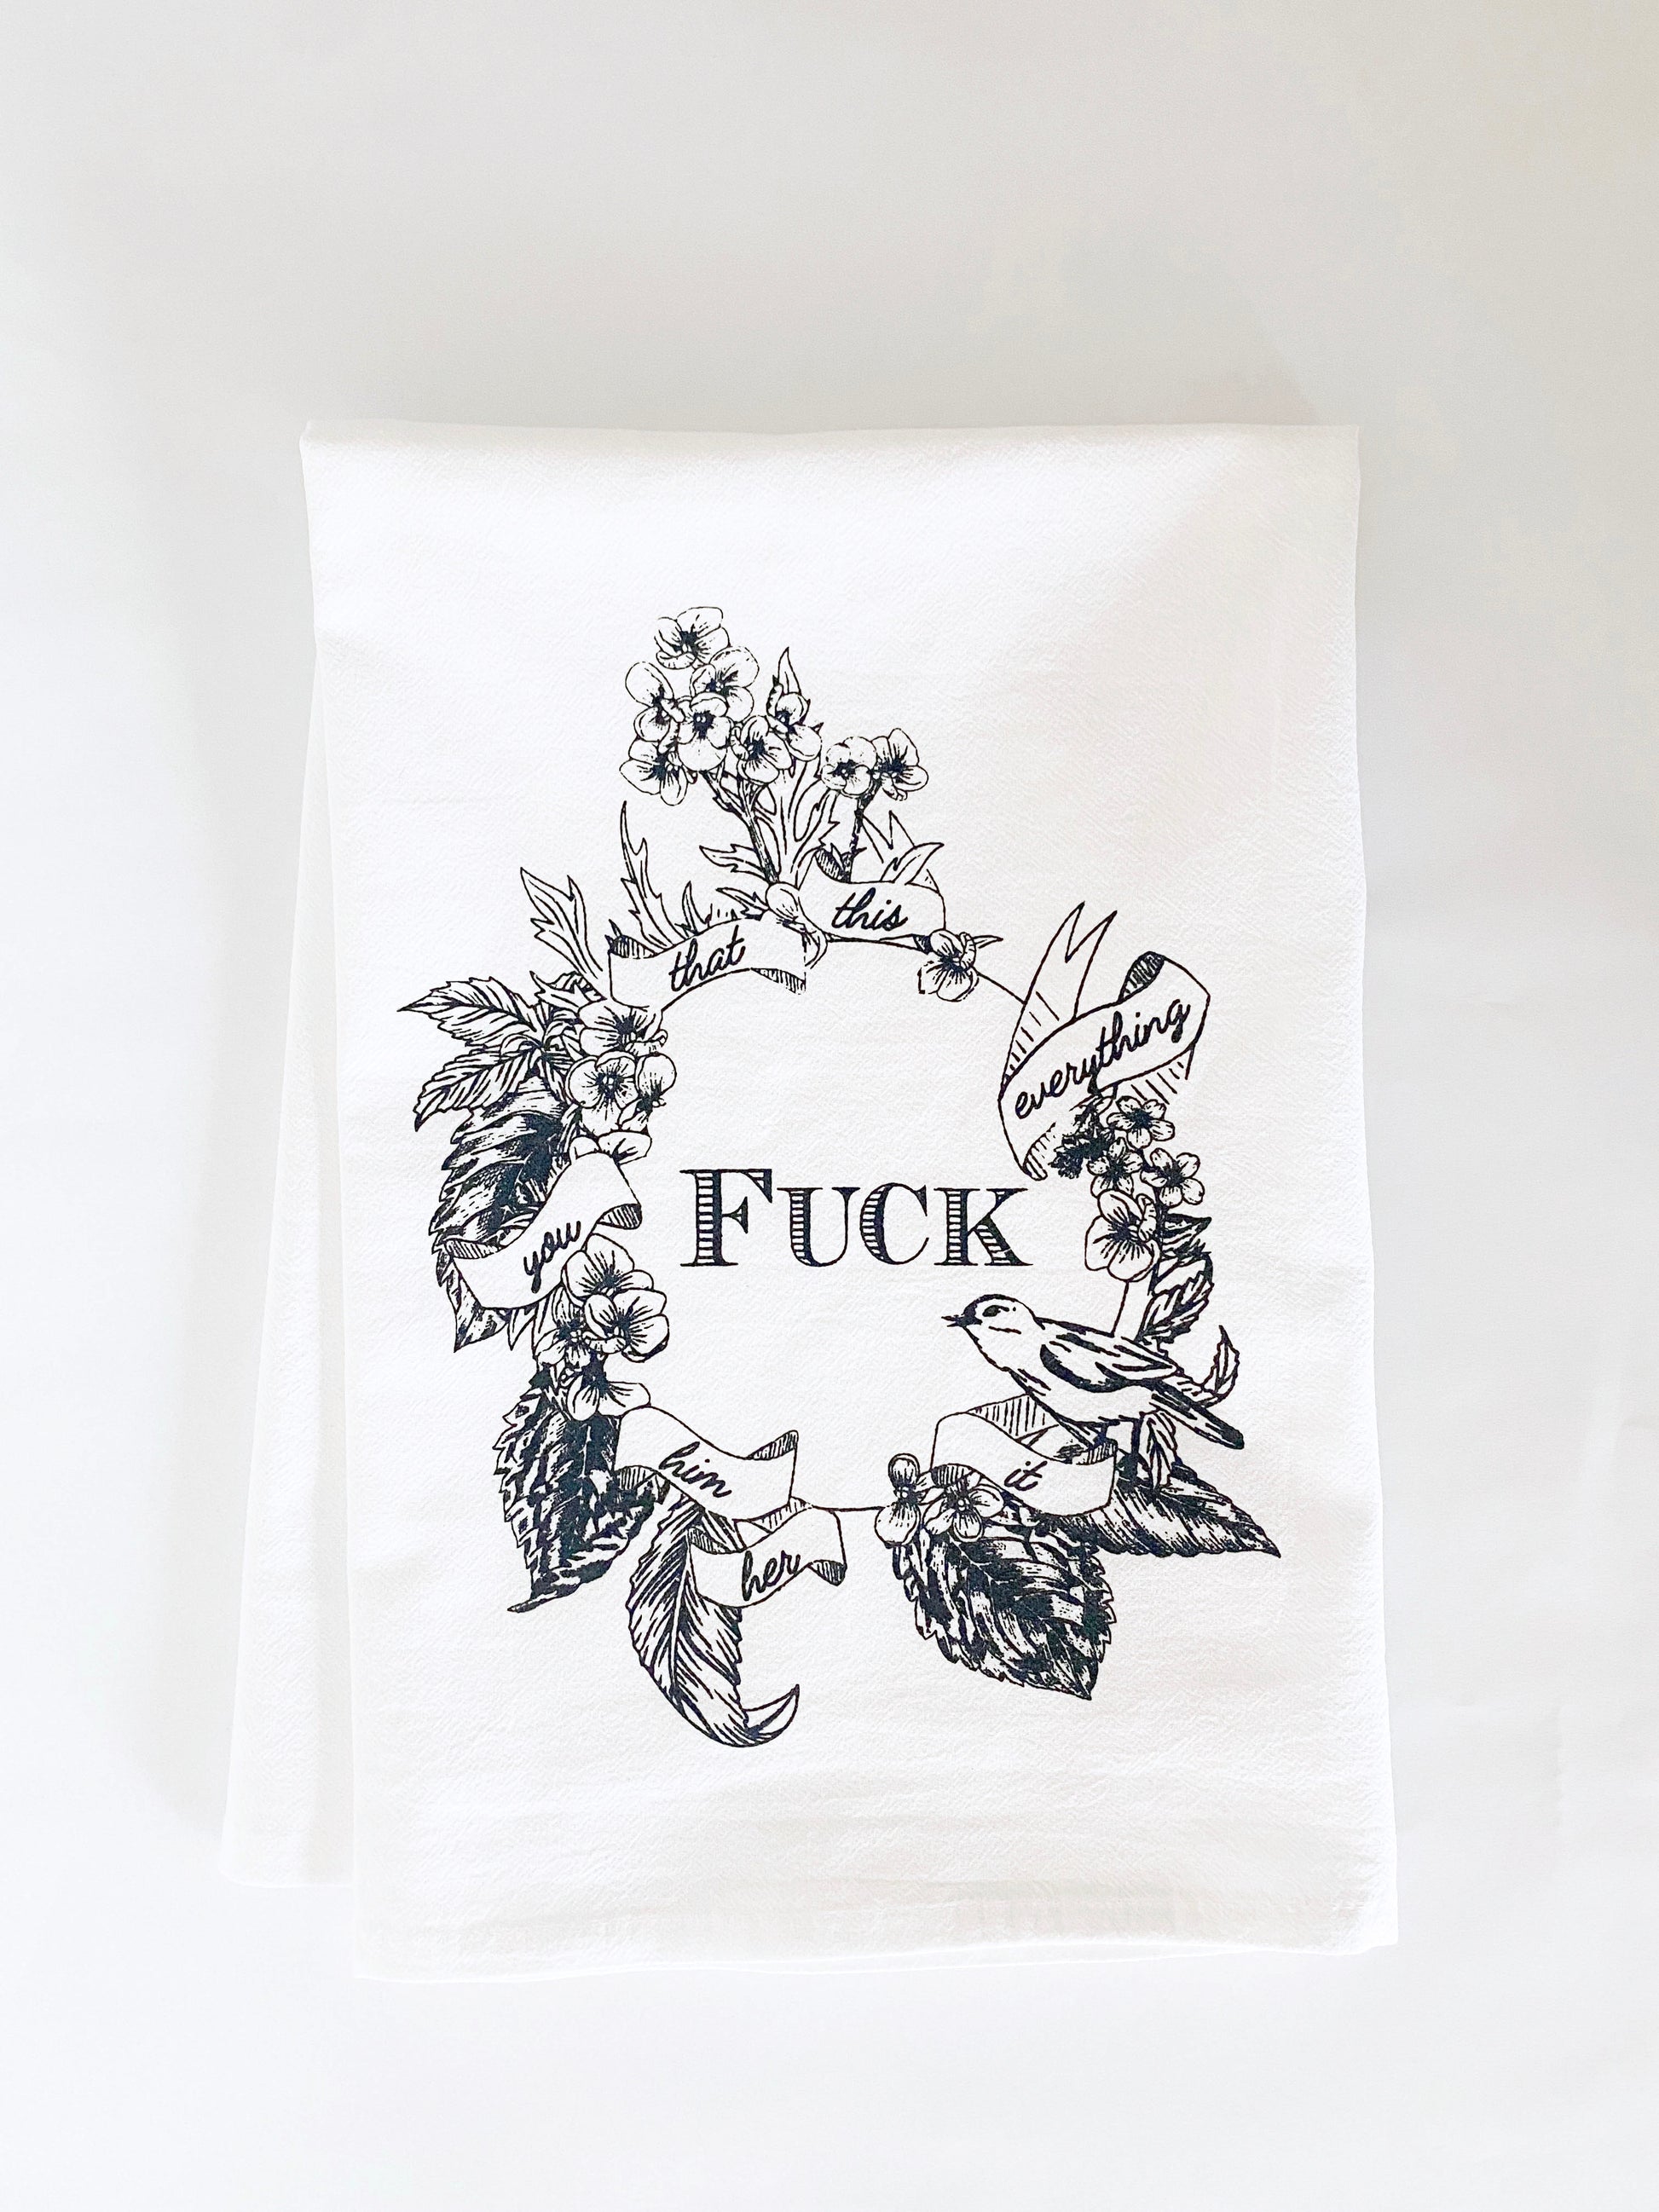 I Just Want to Be a Nice Person/funny Tea Towel/snarky/kitchen